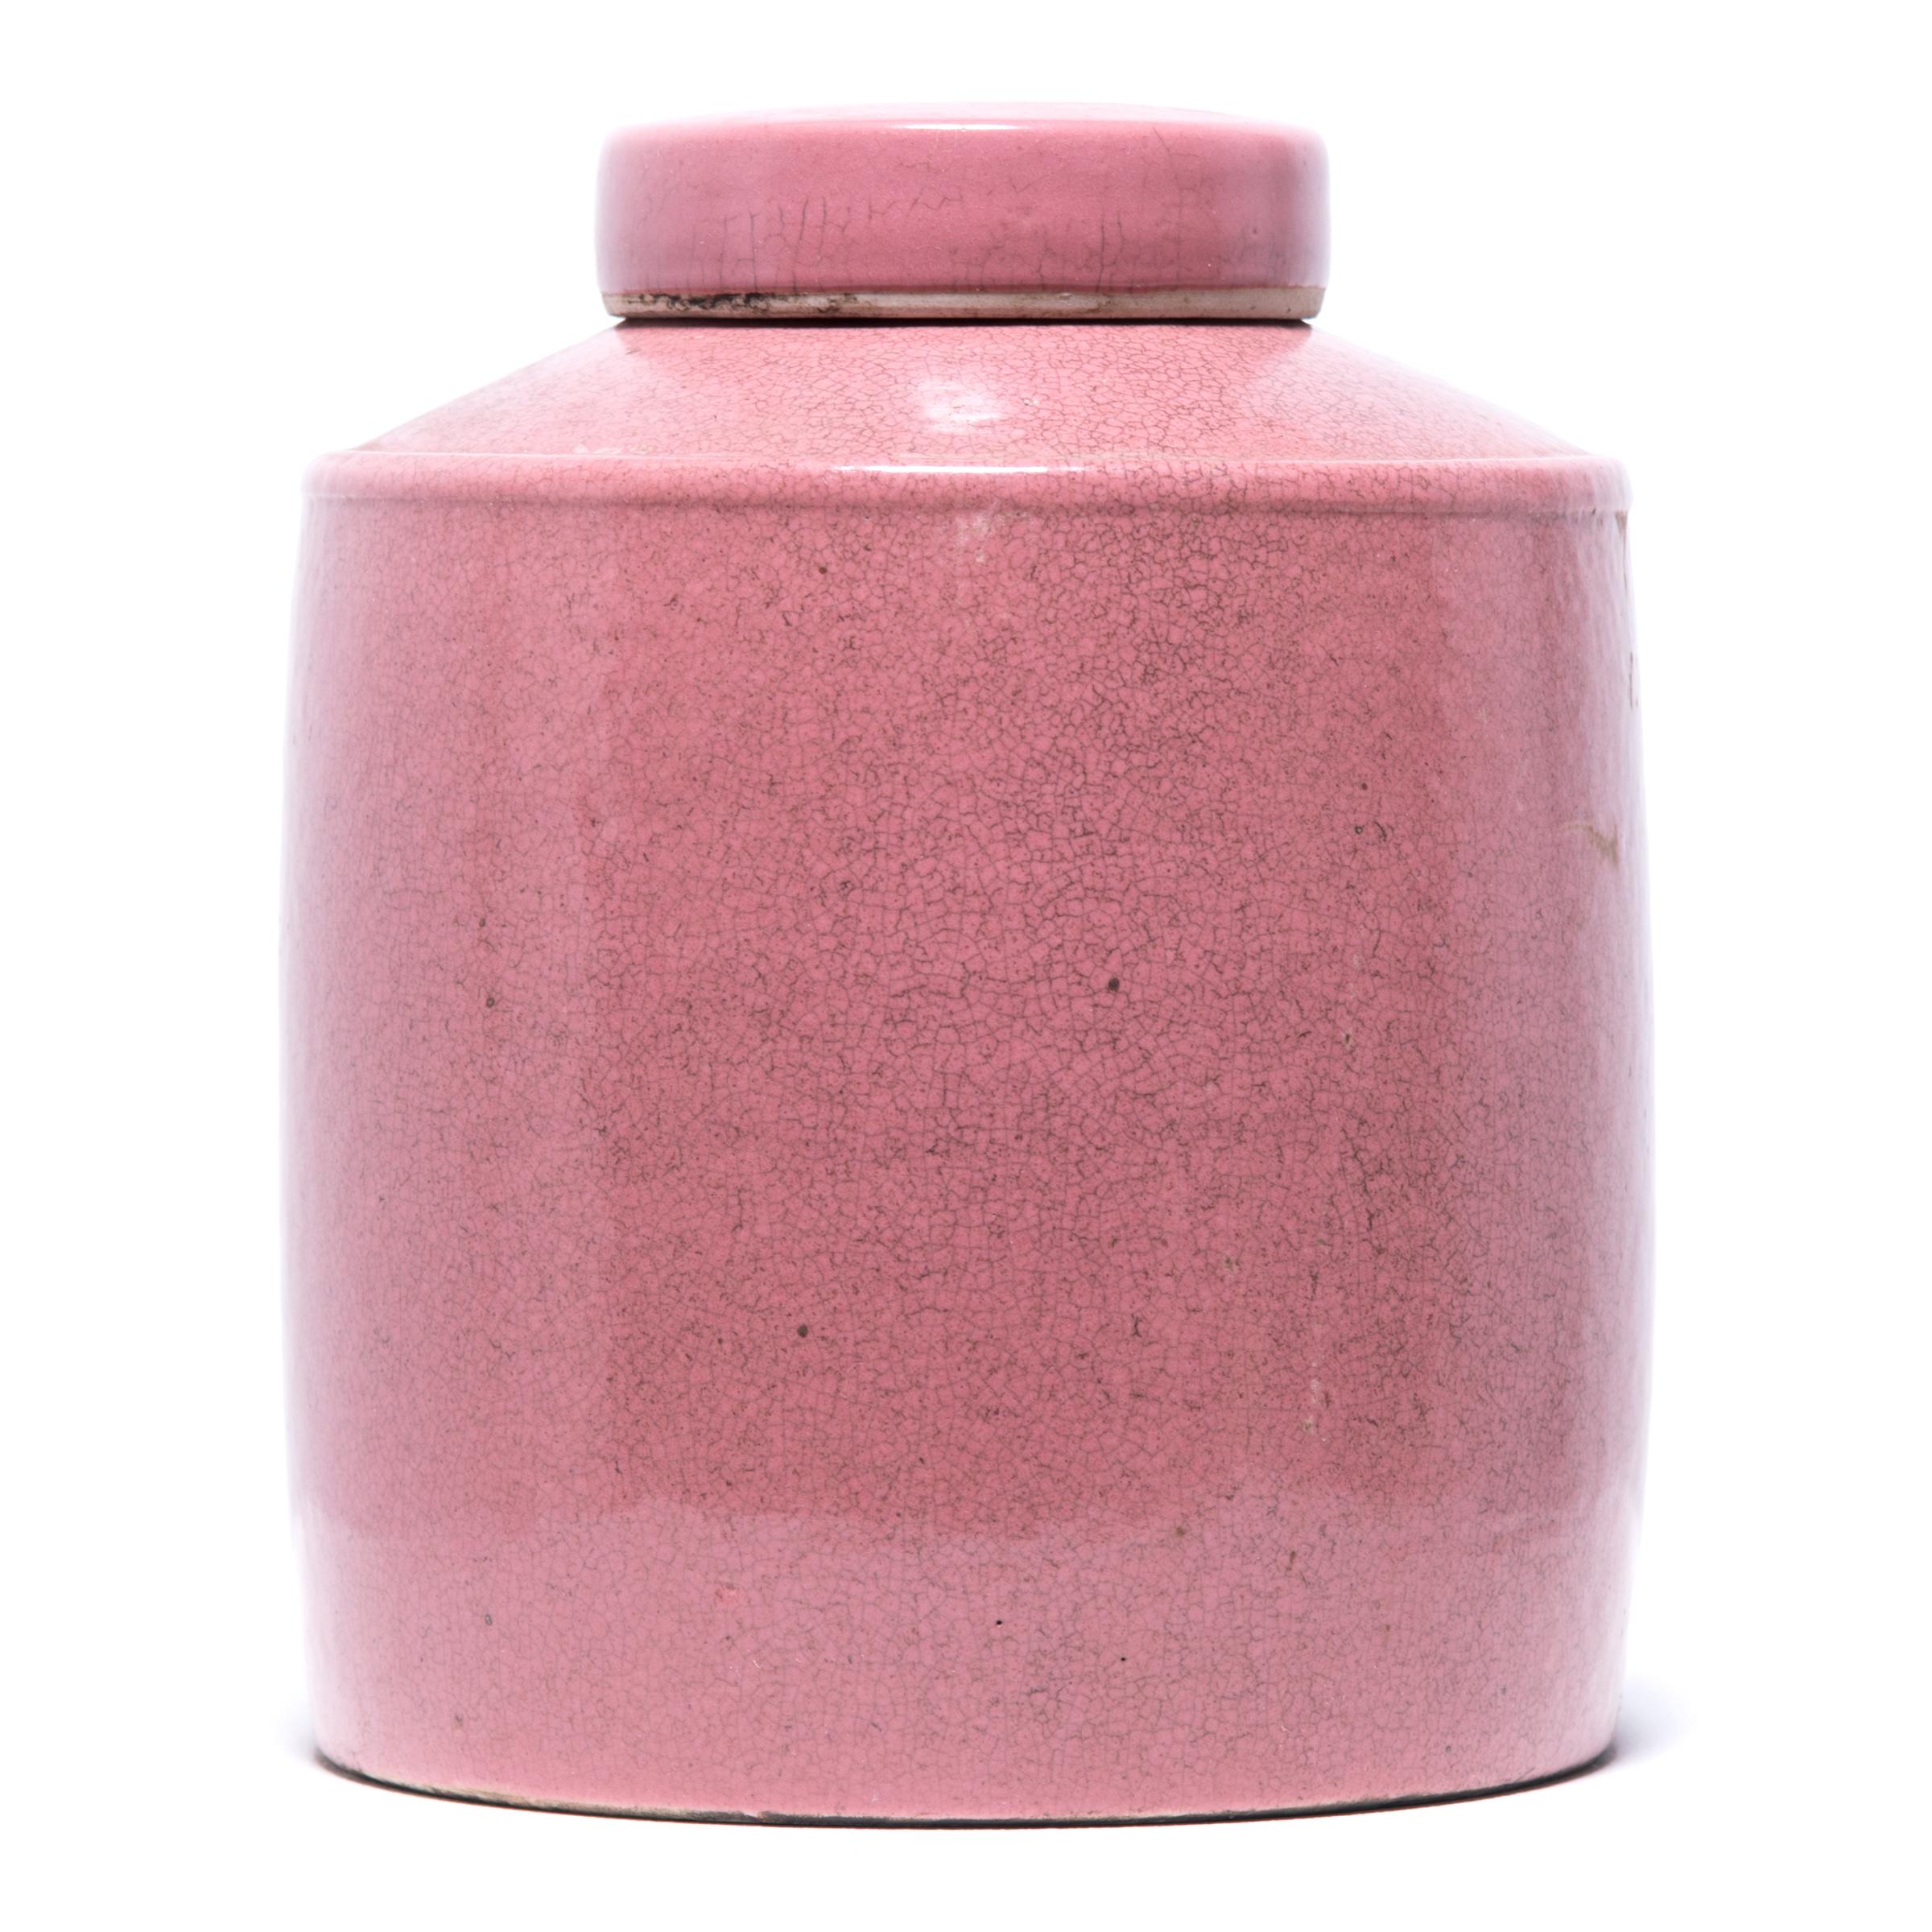 For centuries, Chinese ceramicists have redesigned and reinterpreted the same beautiful, ancient forms. Rendered in a striking shade of rose pink, this Classic jar takes on a modern look. Lidded jars like these were used in tea shops in China, where